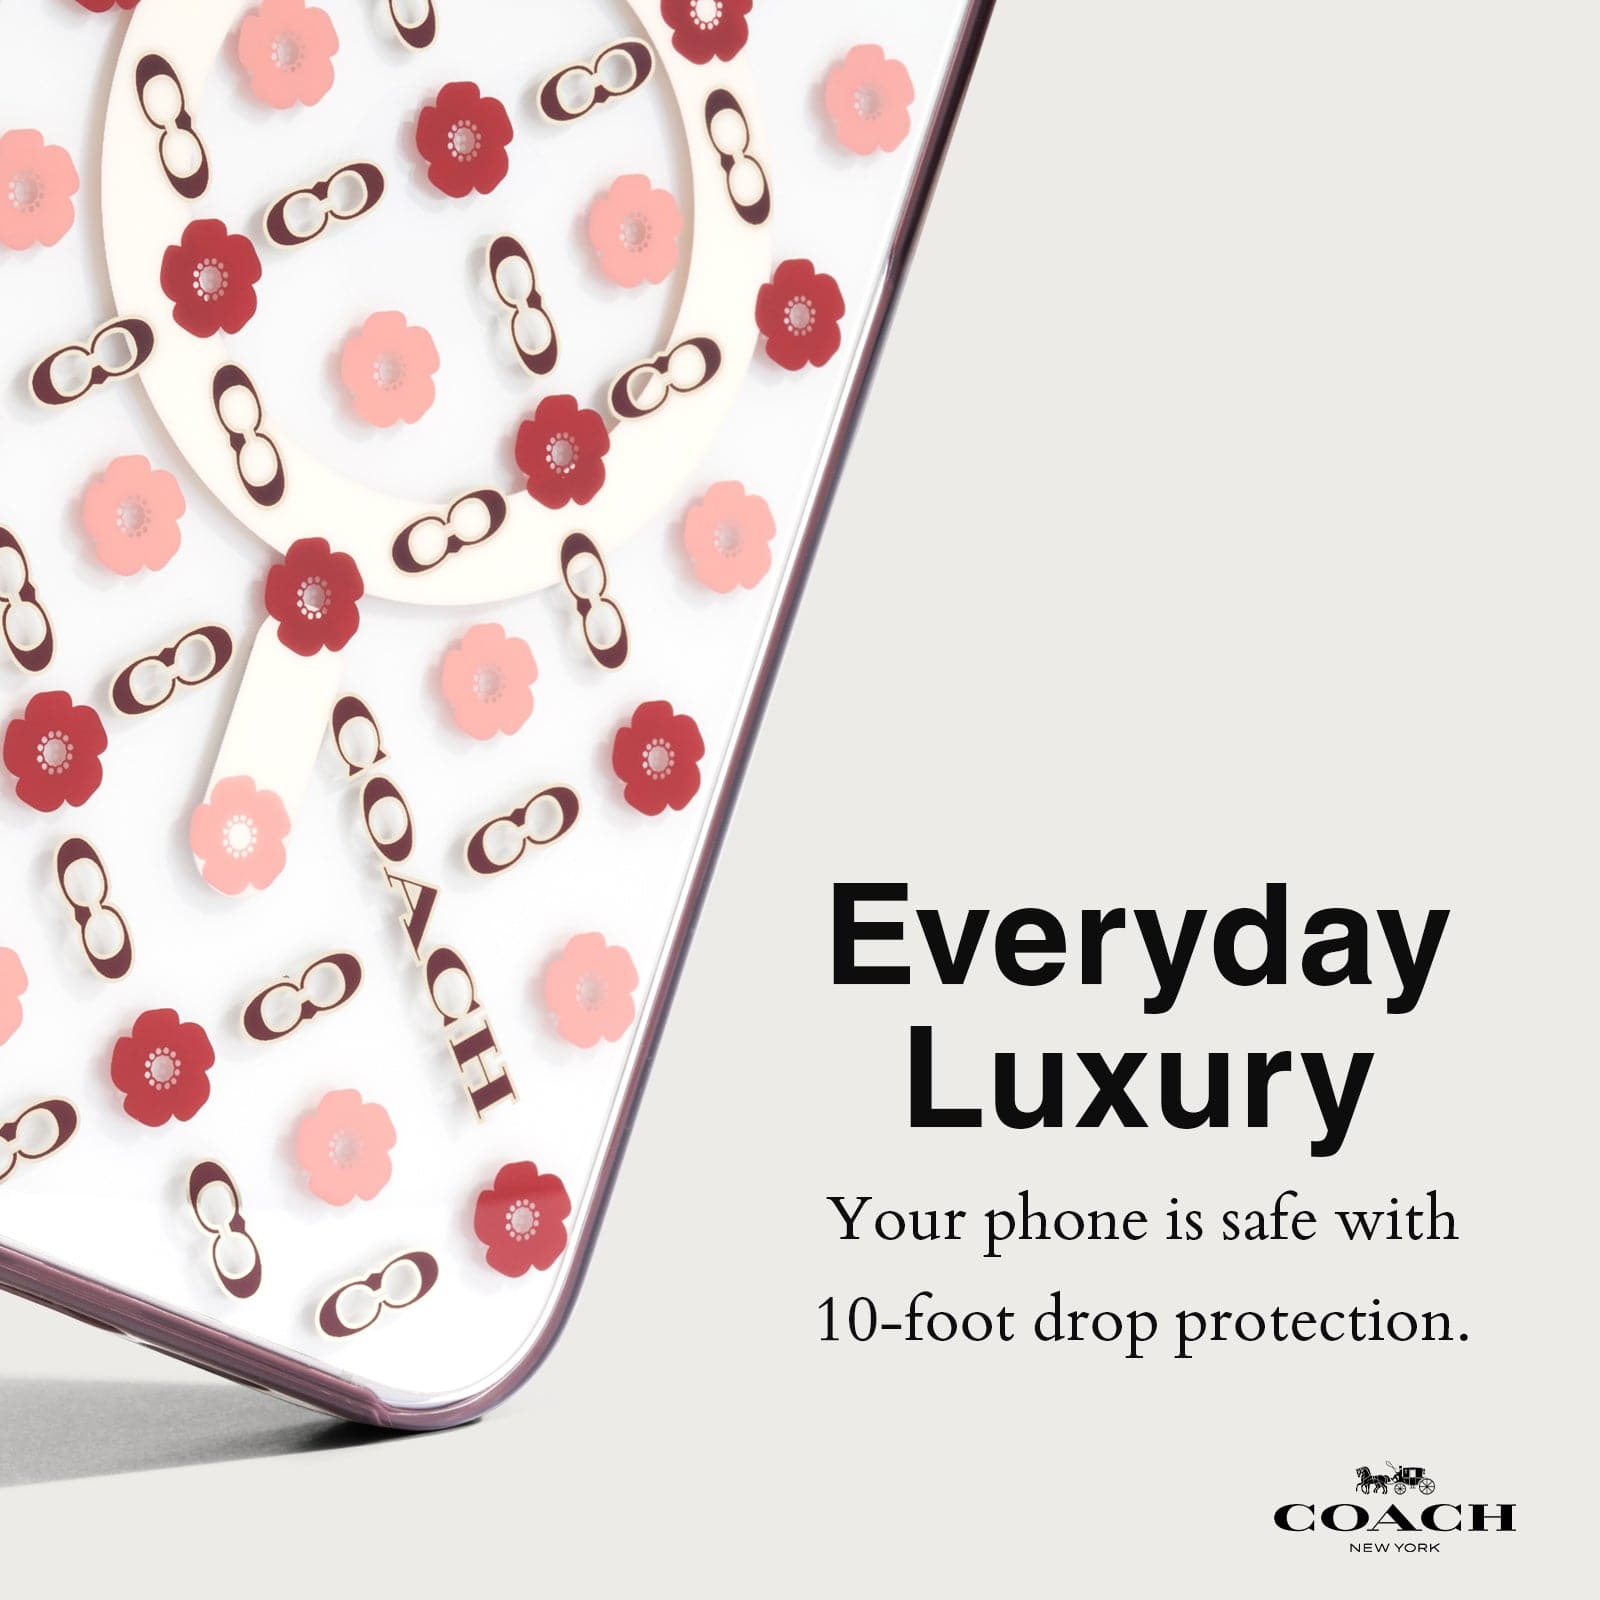 EVERYDAY LUXURY. YOUR PHONE IS SAFE WITH 10 FOOT DROP PROTECTION